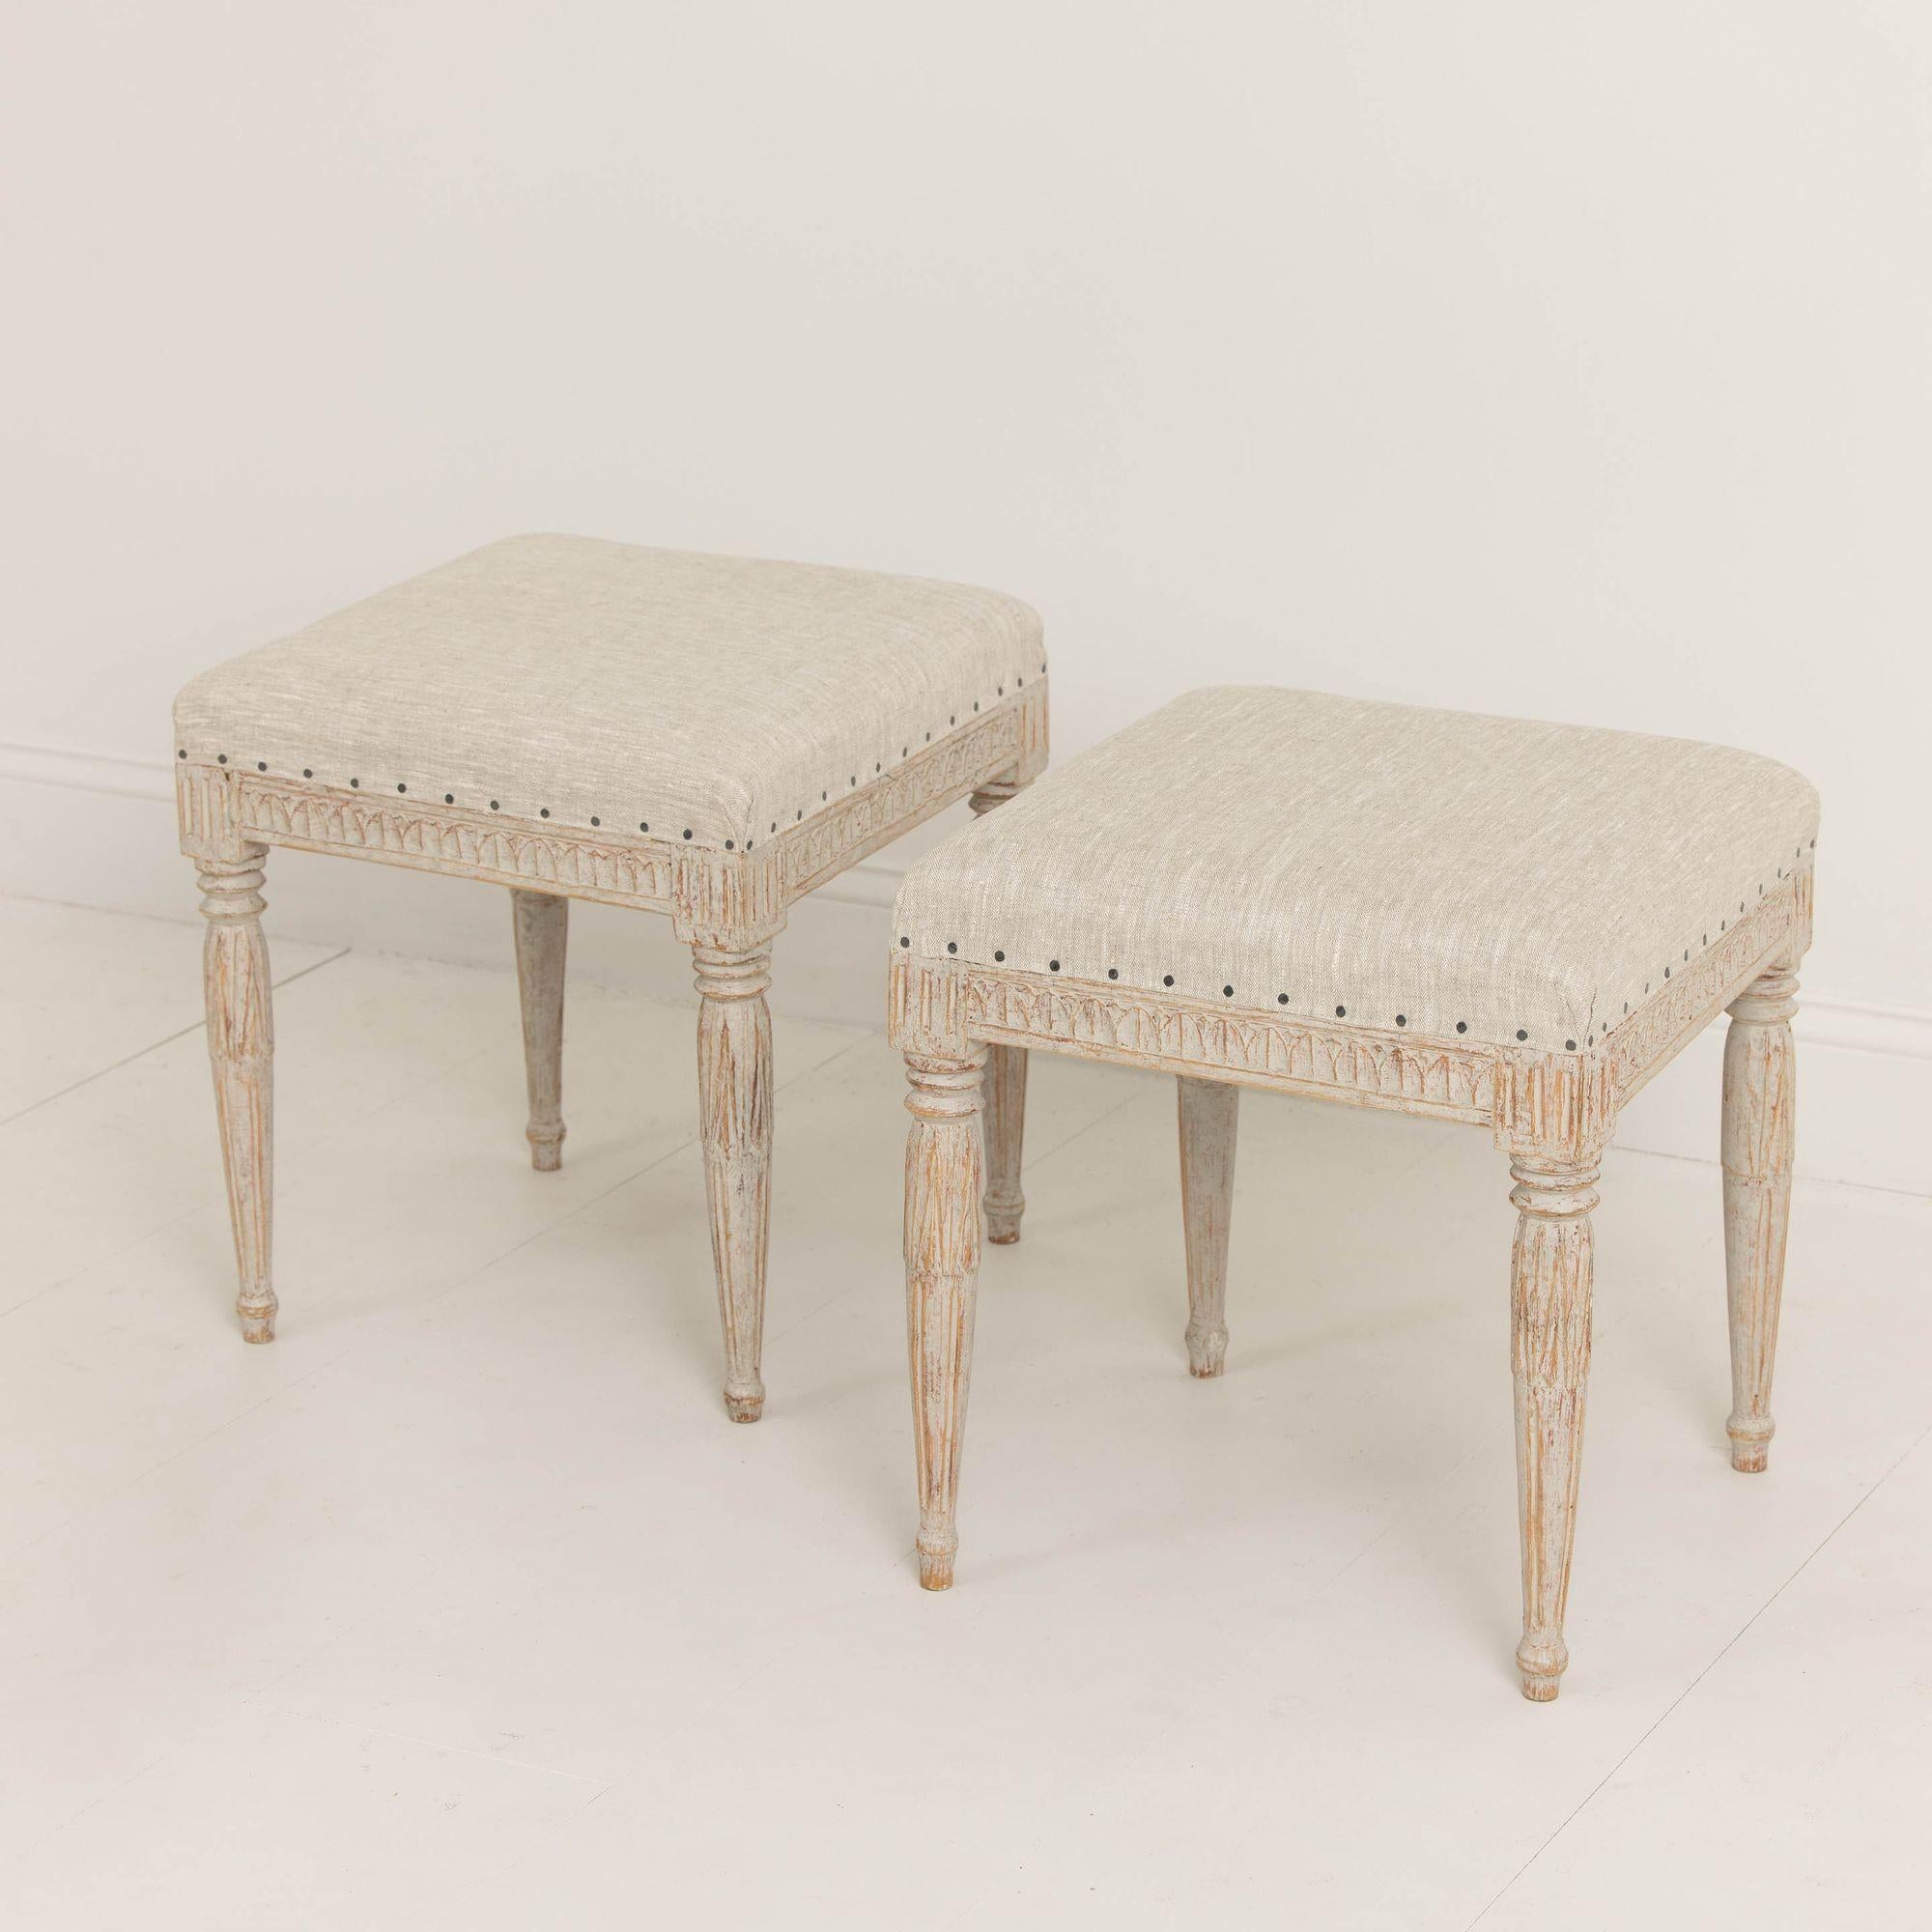 19th c . Swedish Gustavian Painted Stools Signed by Johannes Ericsson In Excellent Condition For Sale In Wichita, KS